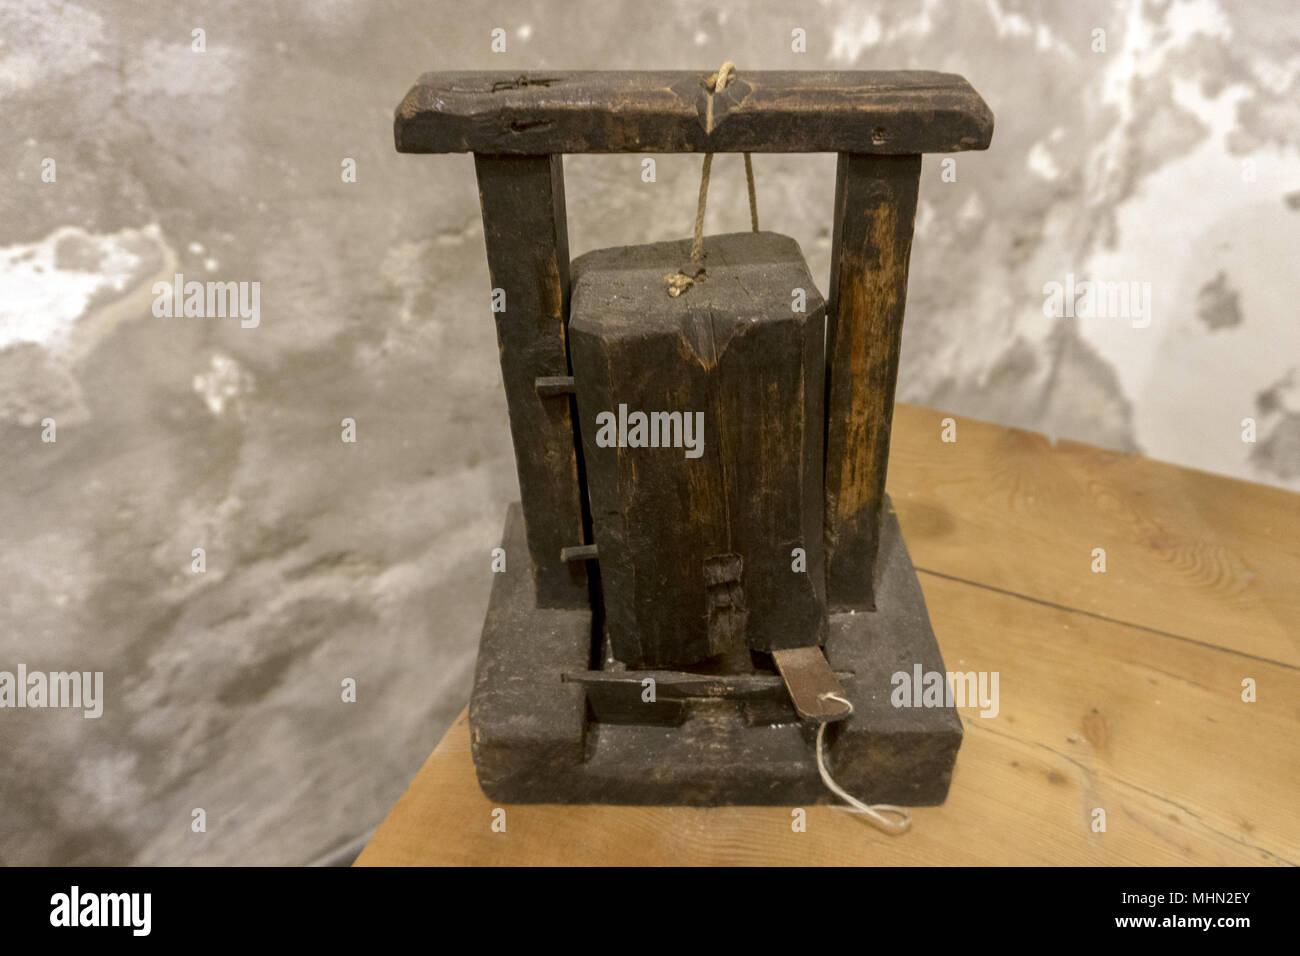 Guillotine Mouse Trap. How To Build An Antique Style Mouse Trap